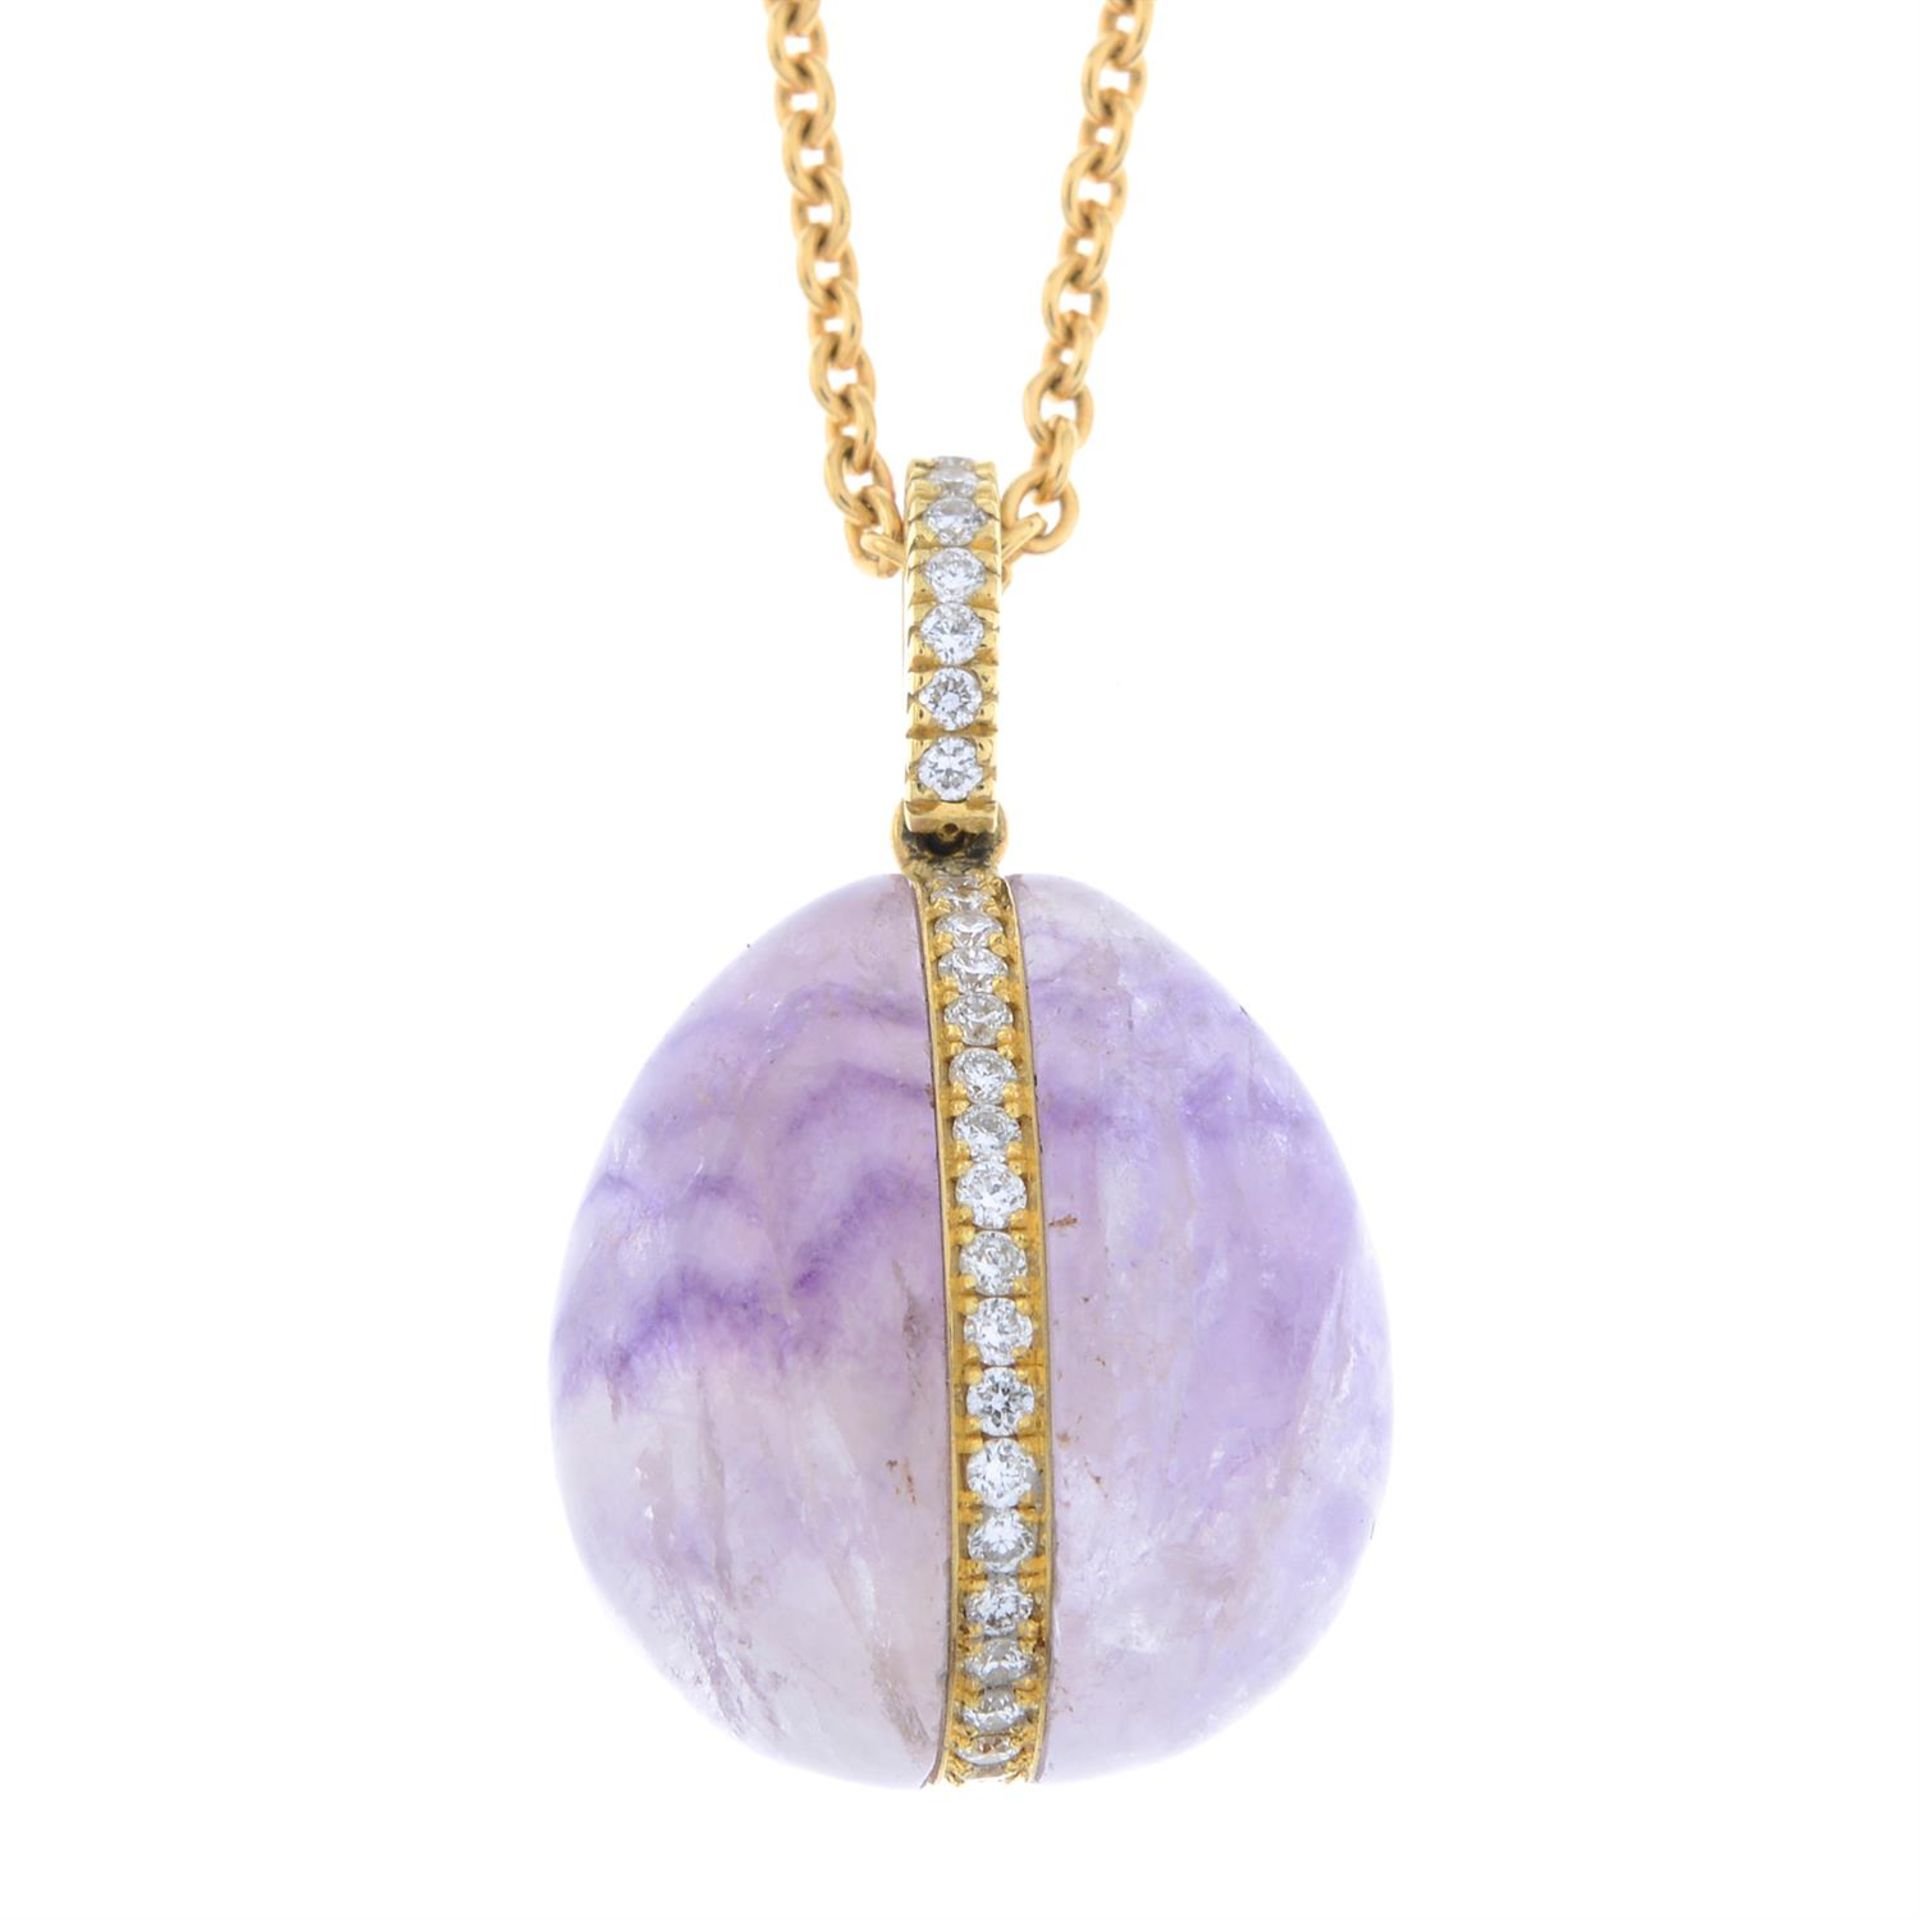 18ct gold Blue John and diamond egg charm by Fabergé - Image 3 of 5